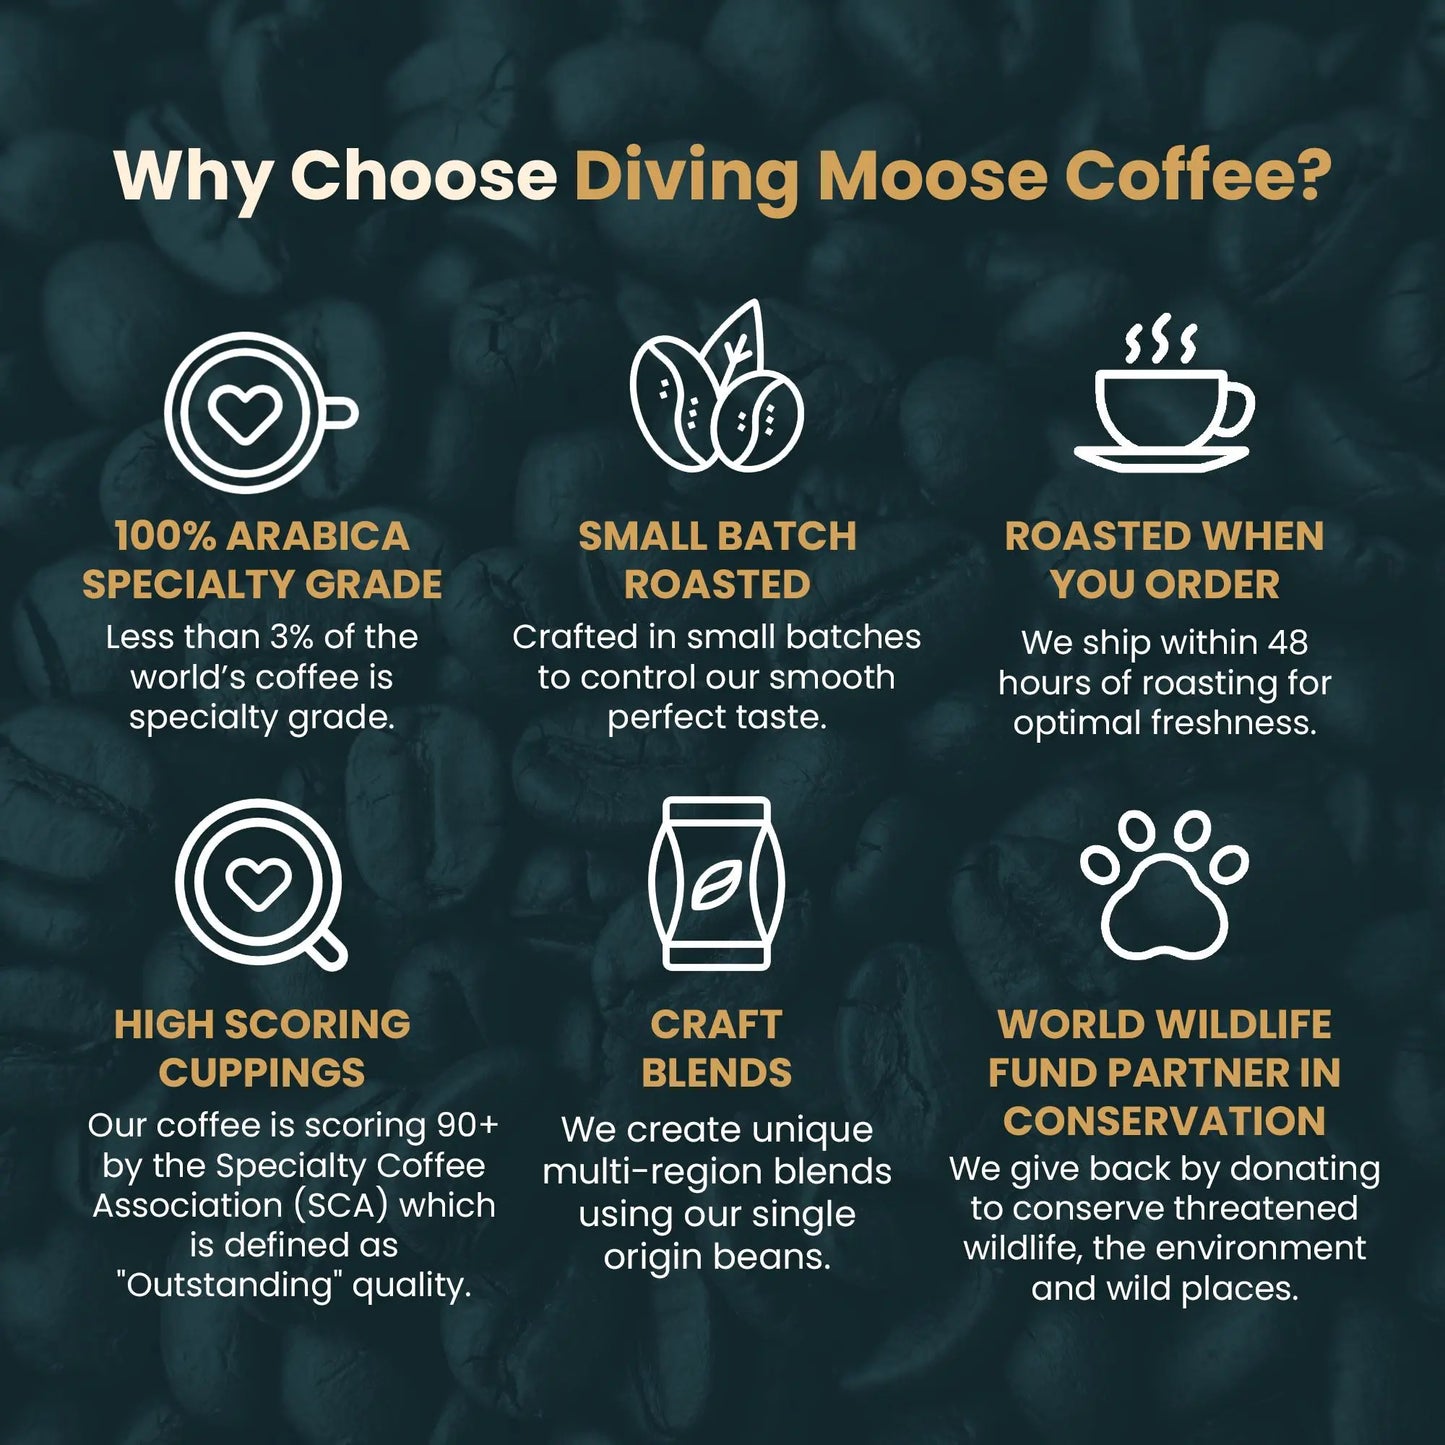 The Diving Moose Signature Blend